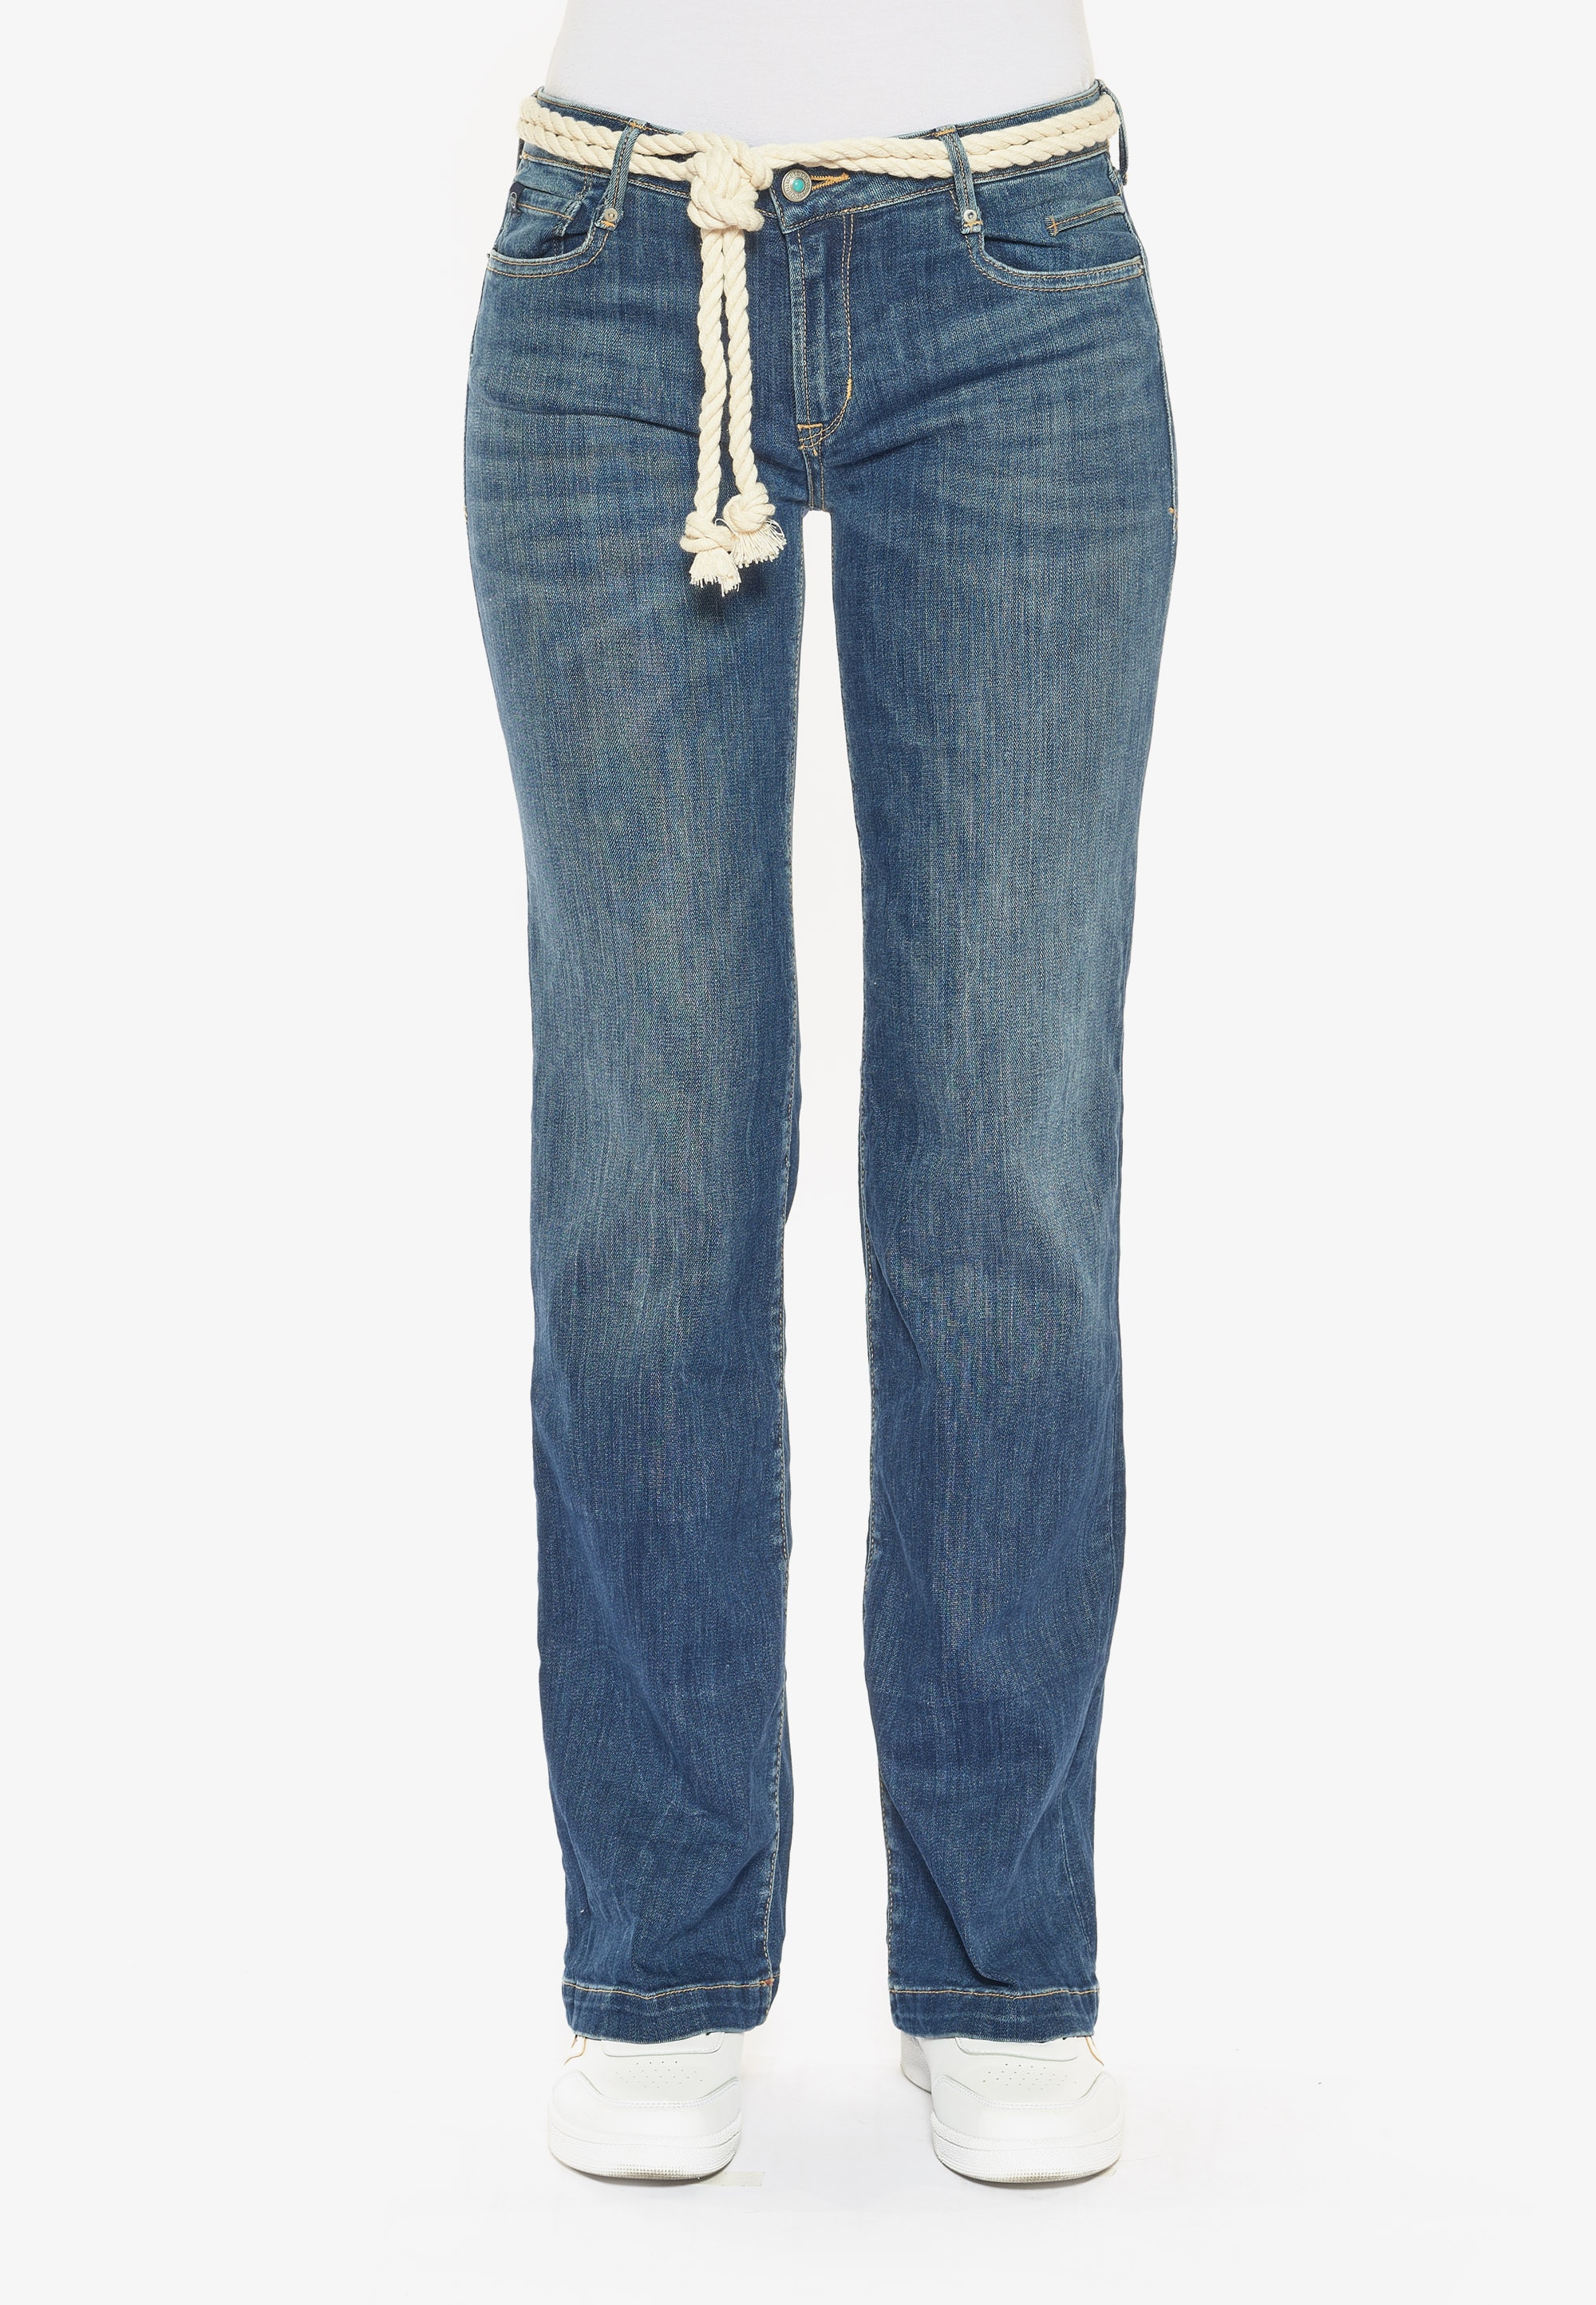 Bequeme Jeans »FLARE«, in tollem Bootcut-Schnitt